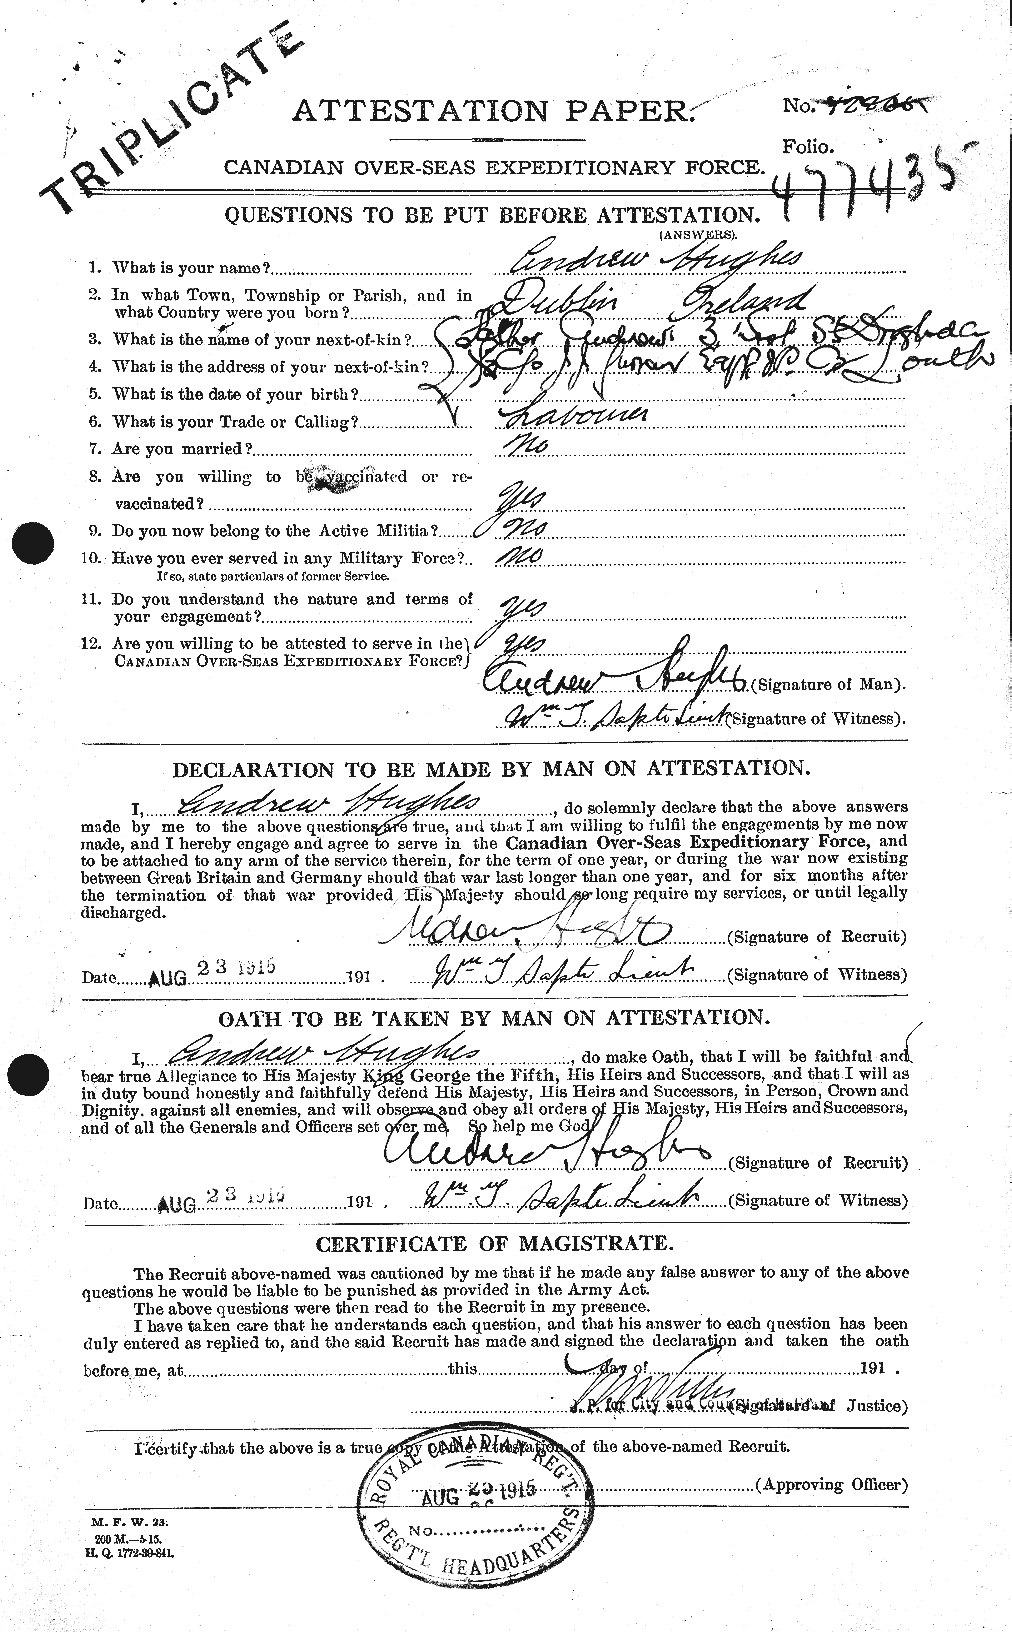 Personnel Records of the First World War - CEF 402549a